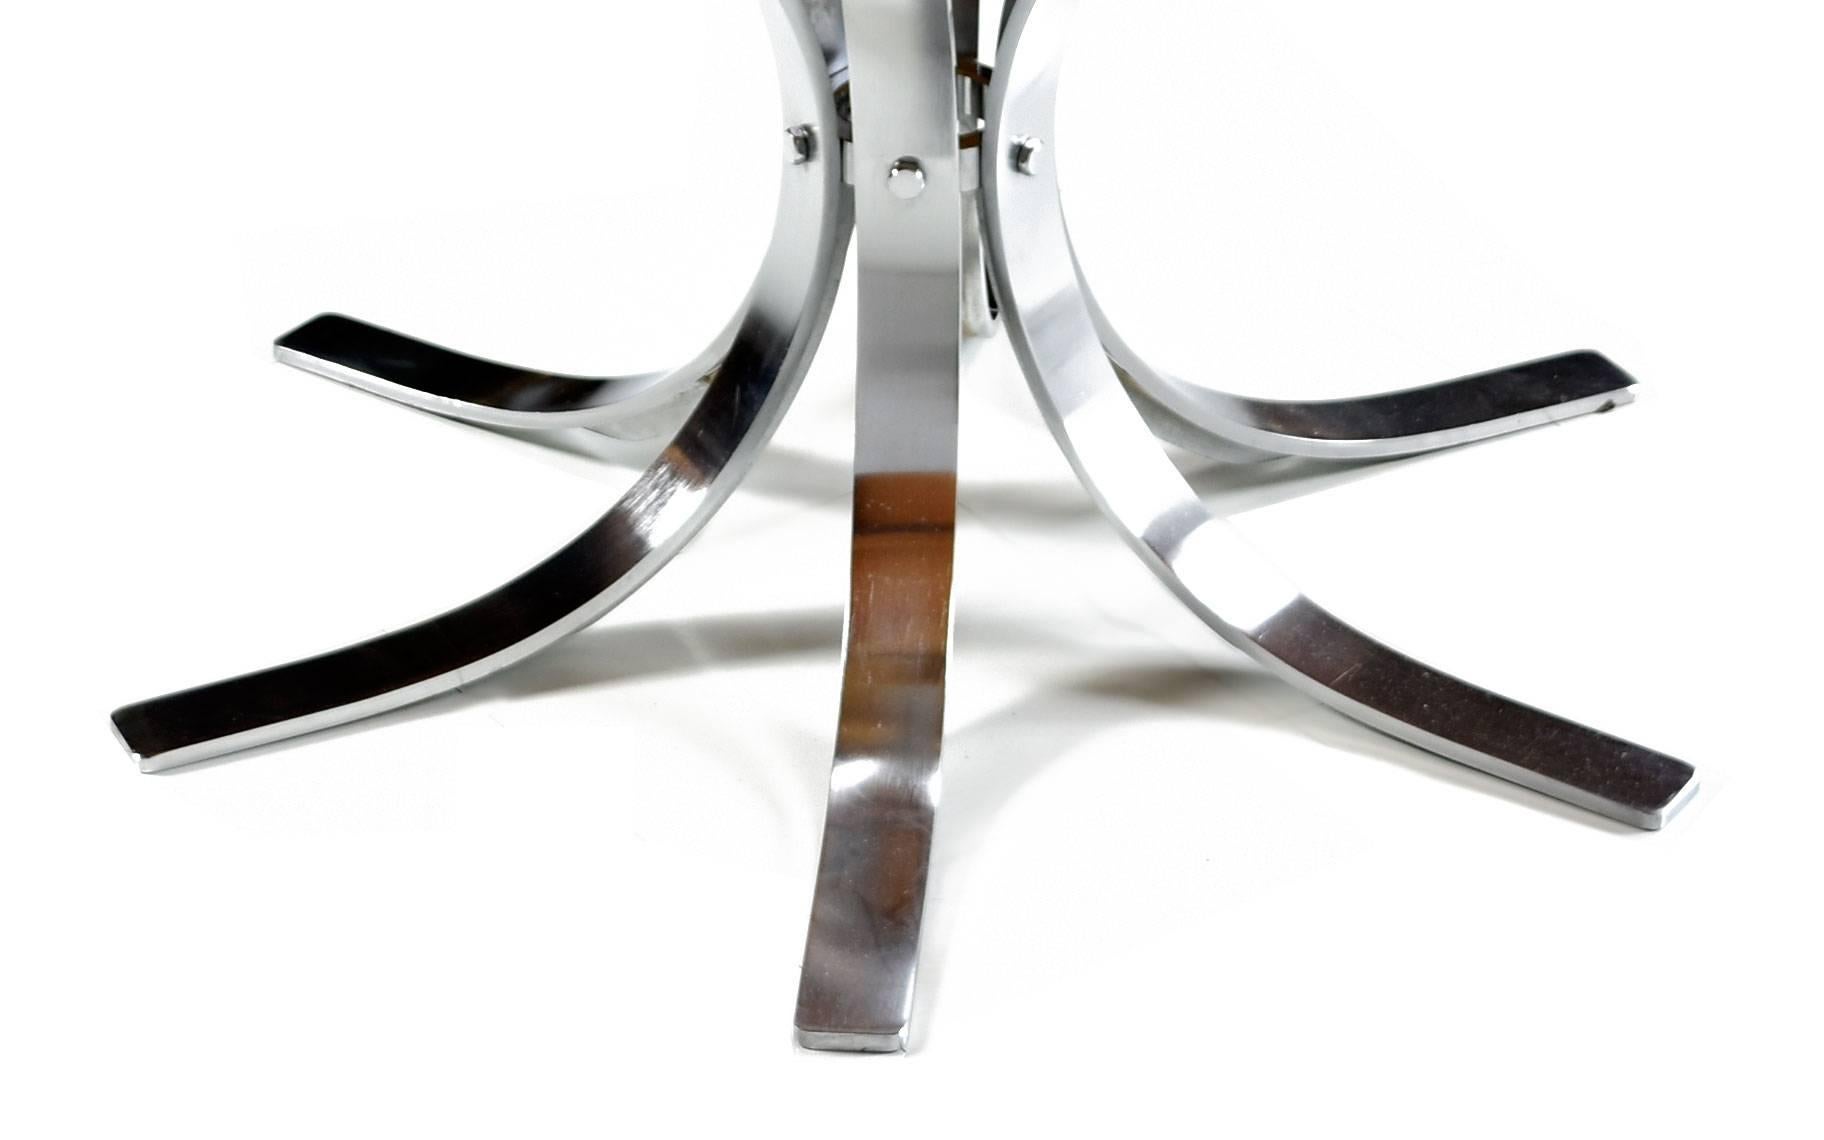 Late 20th Century Danish Rosewood Chrome Tulip Base Lotus Expanding Flip Flap Table by Dyrlund